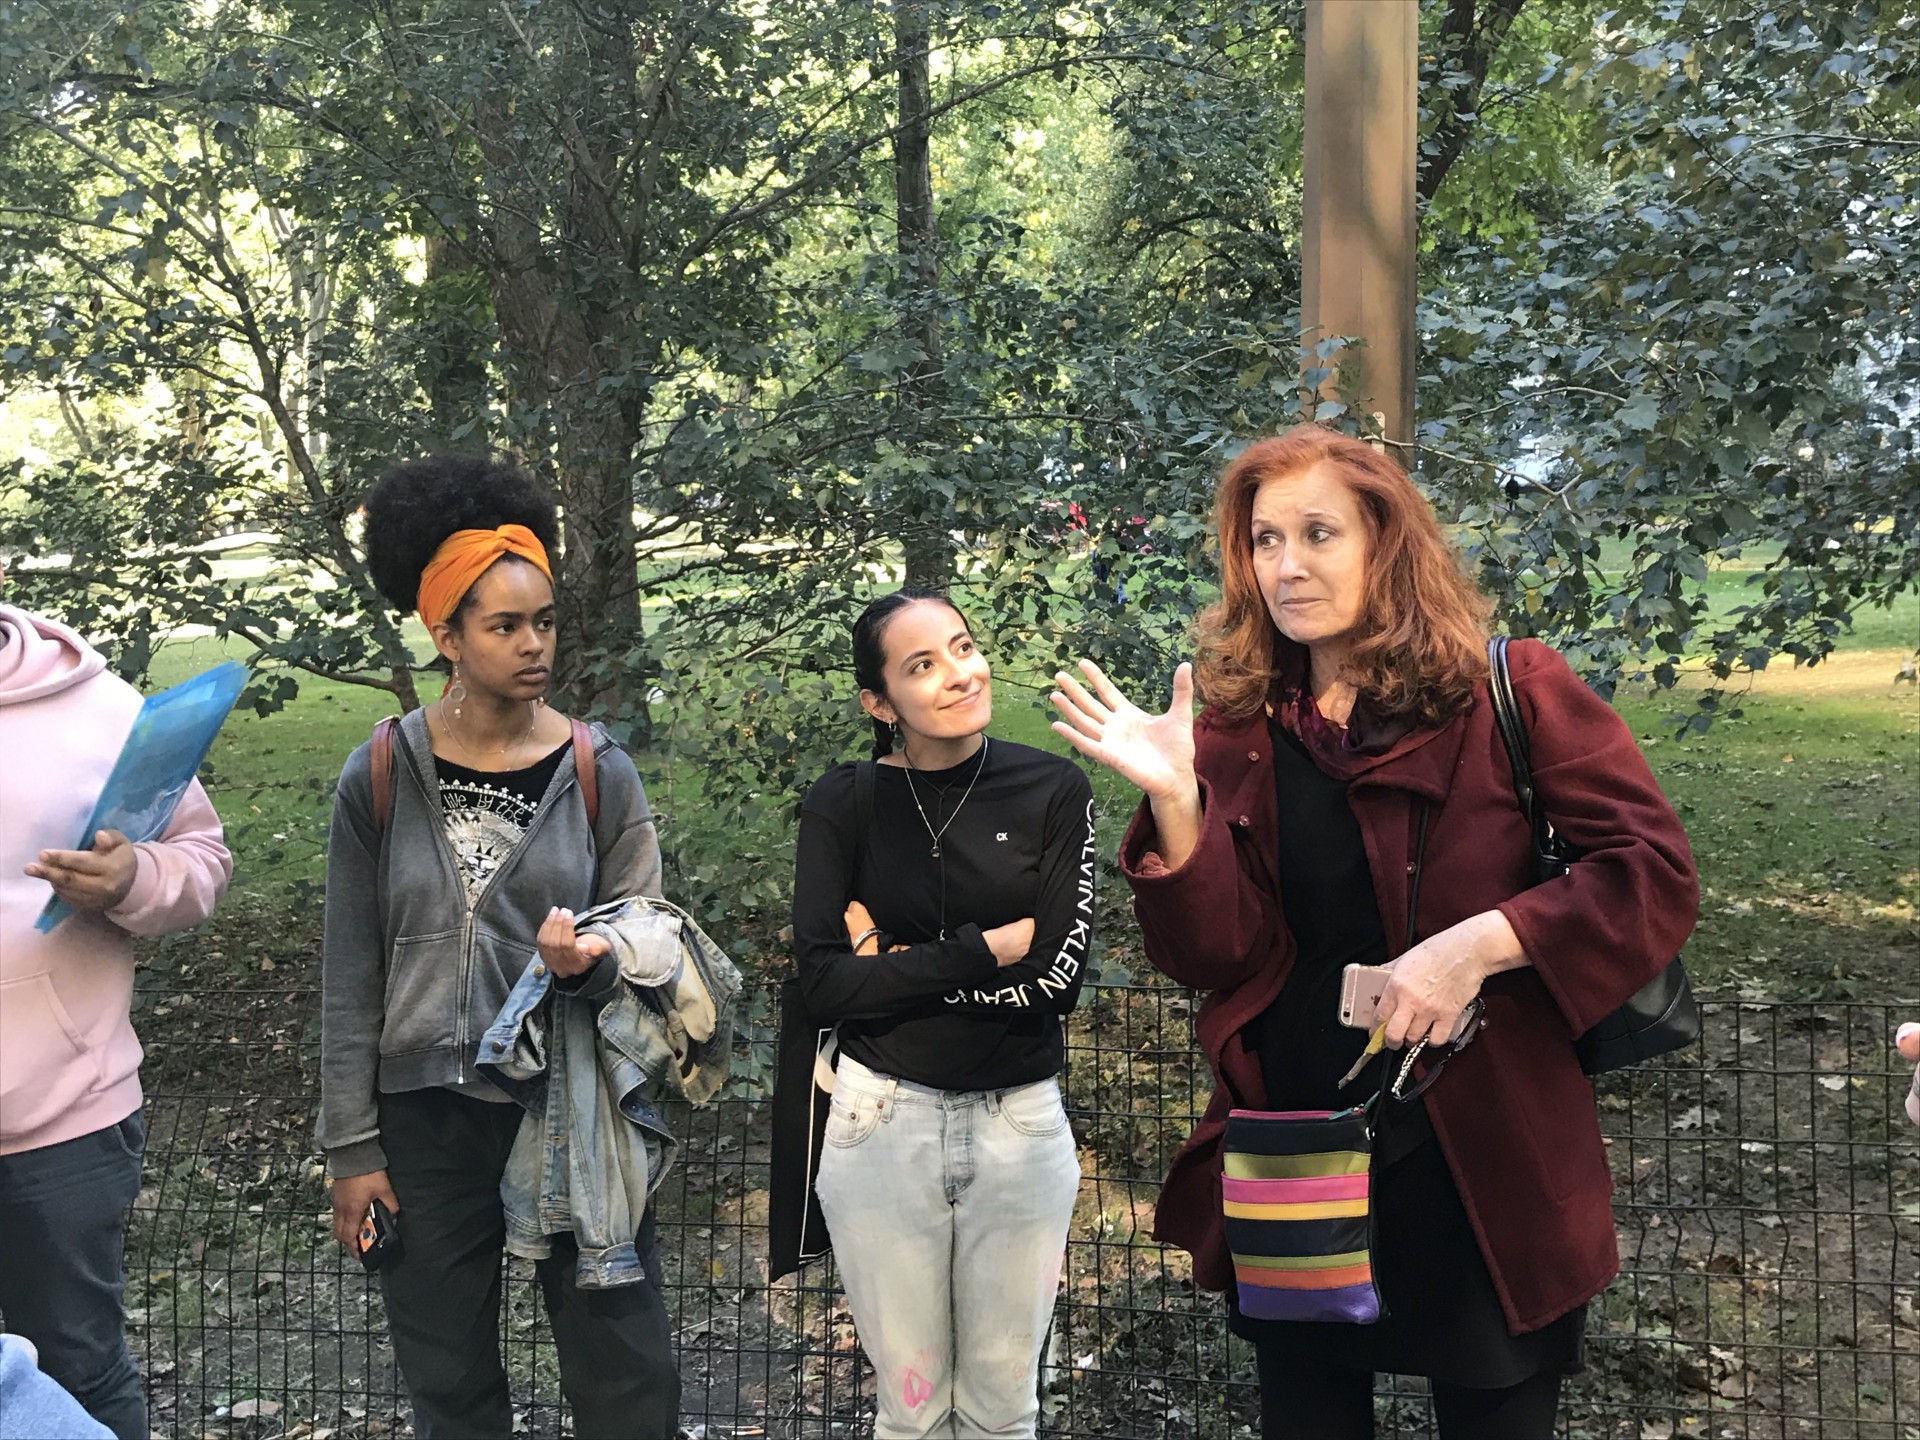 Karen Finley leading discussion in Central Park